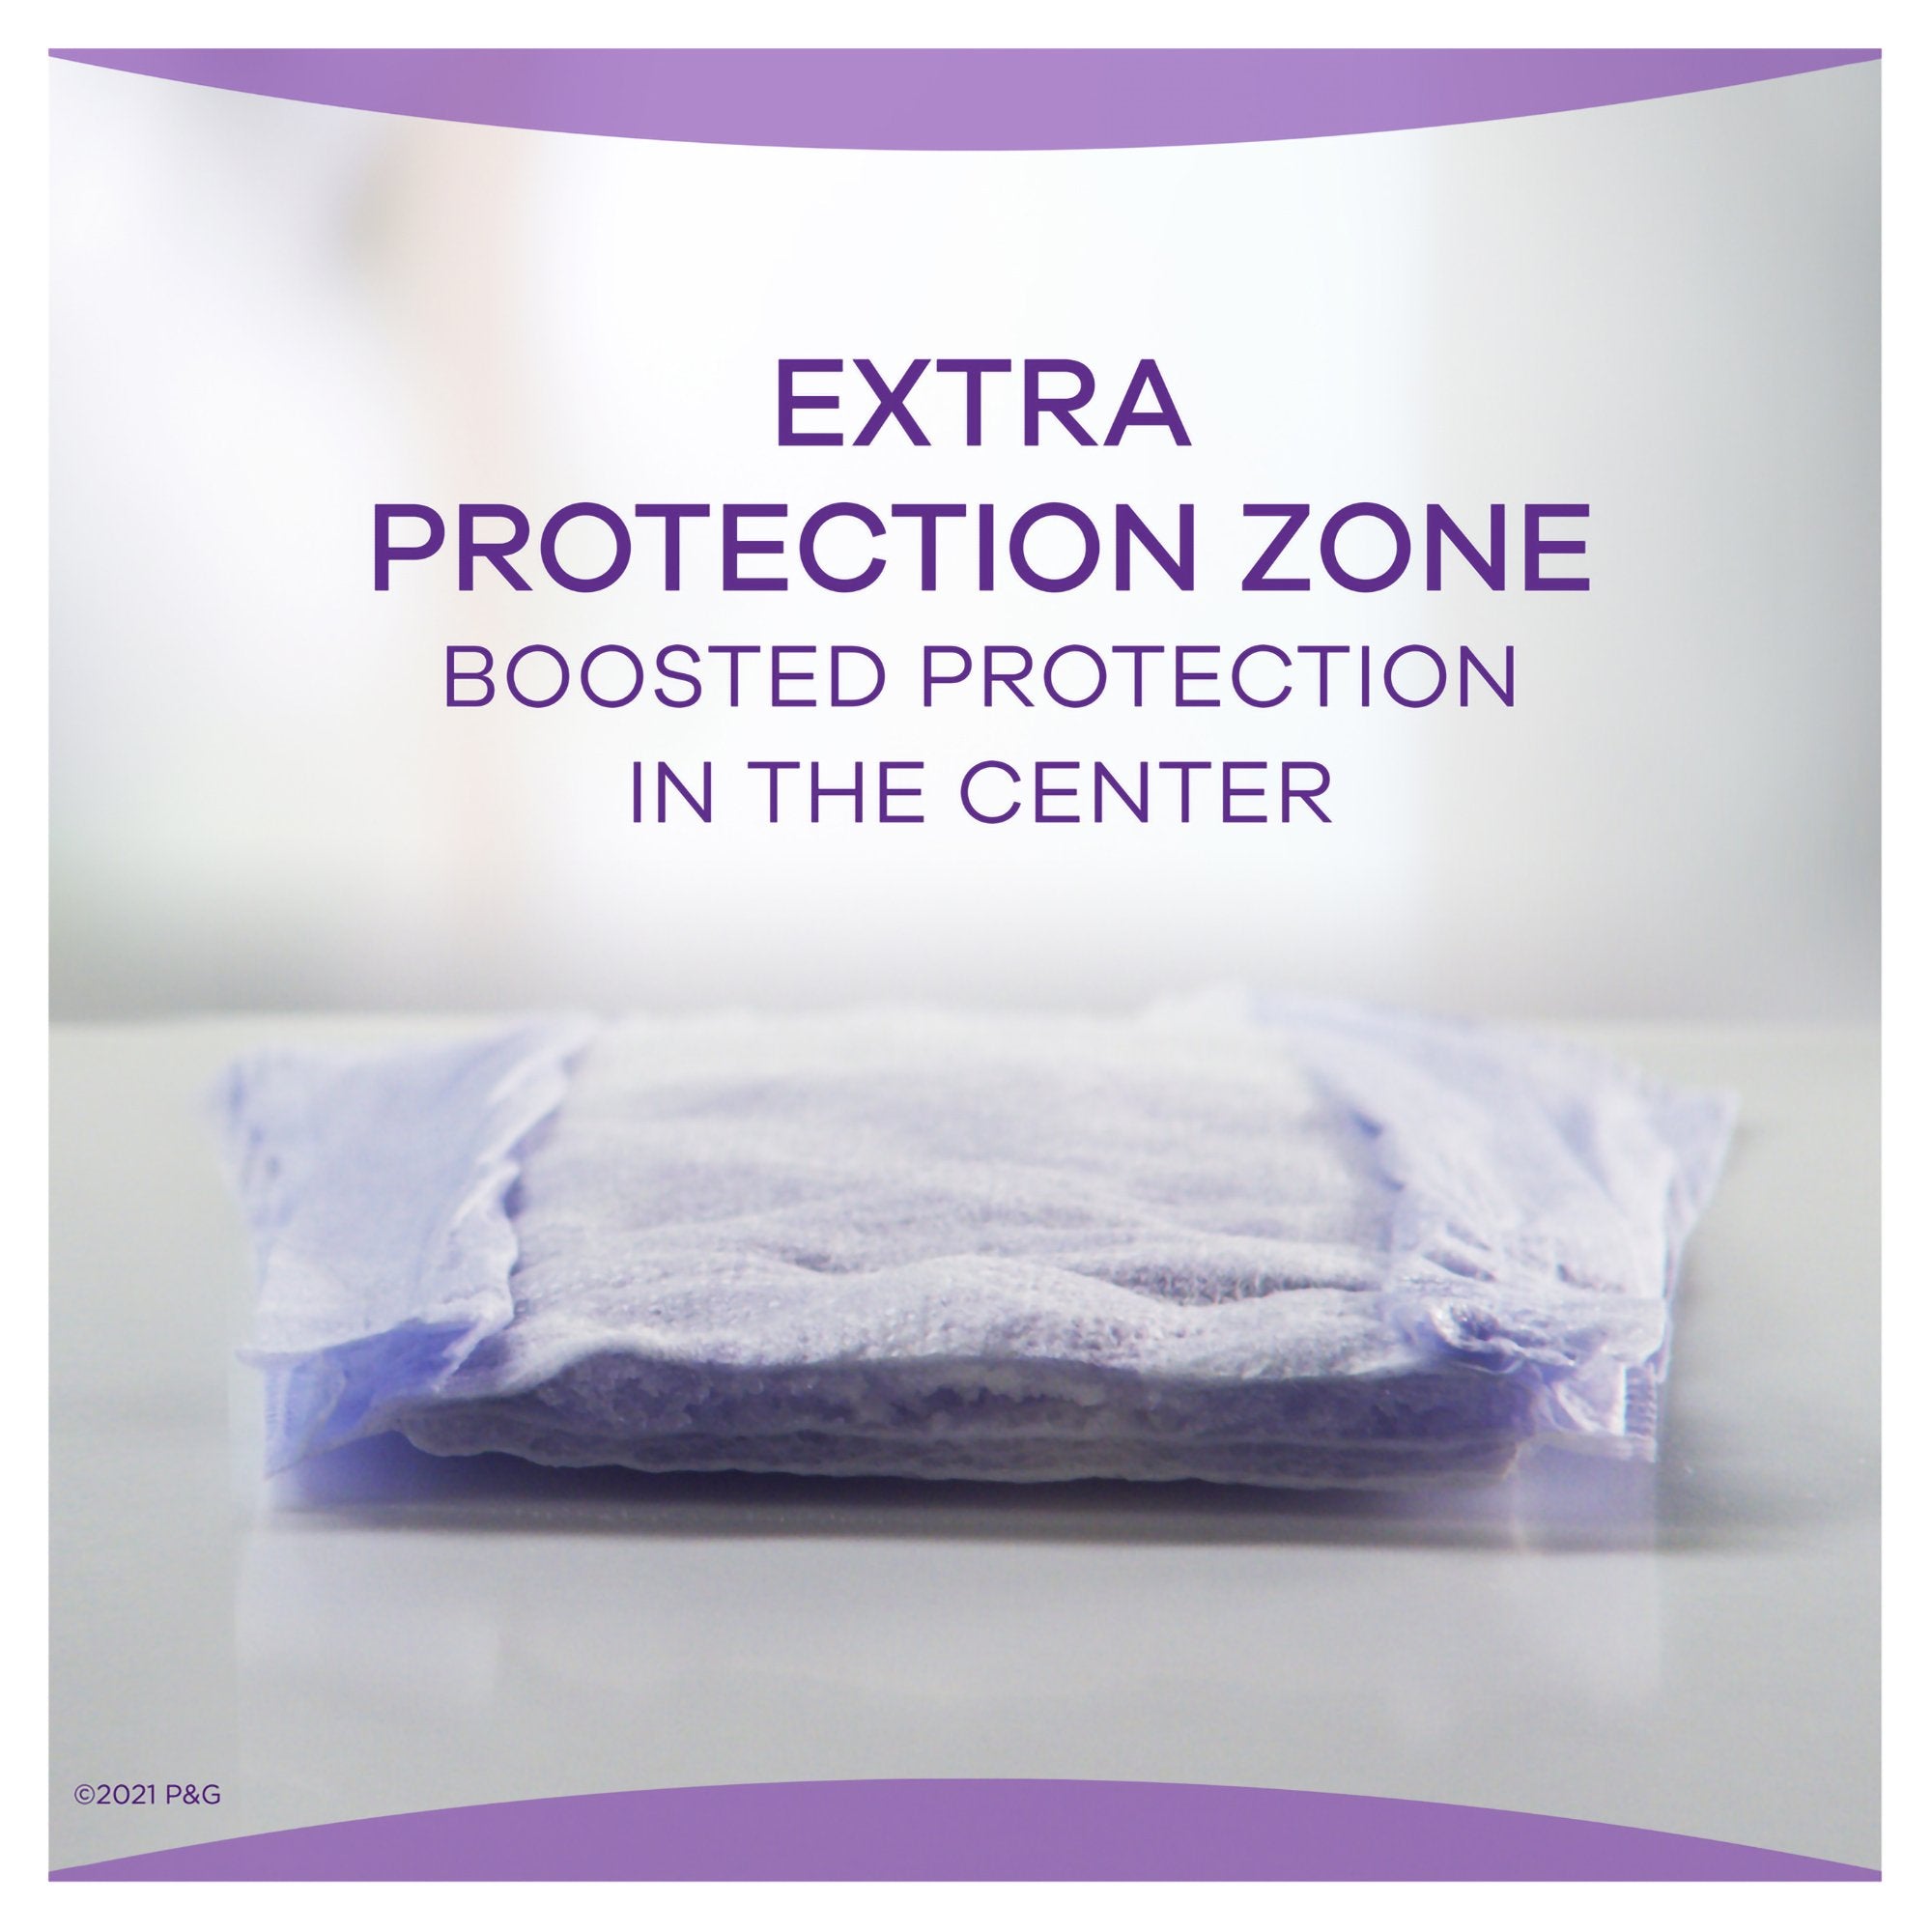 Bladder Control Pad Always Discreet 12-1/2 Inch Length Moderate Absorbency RapidDry Core One Size Fits Most